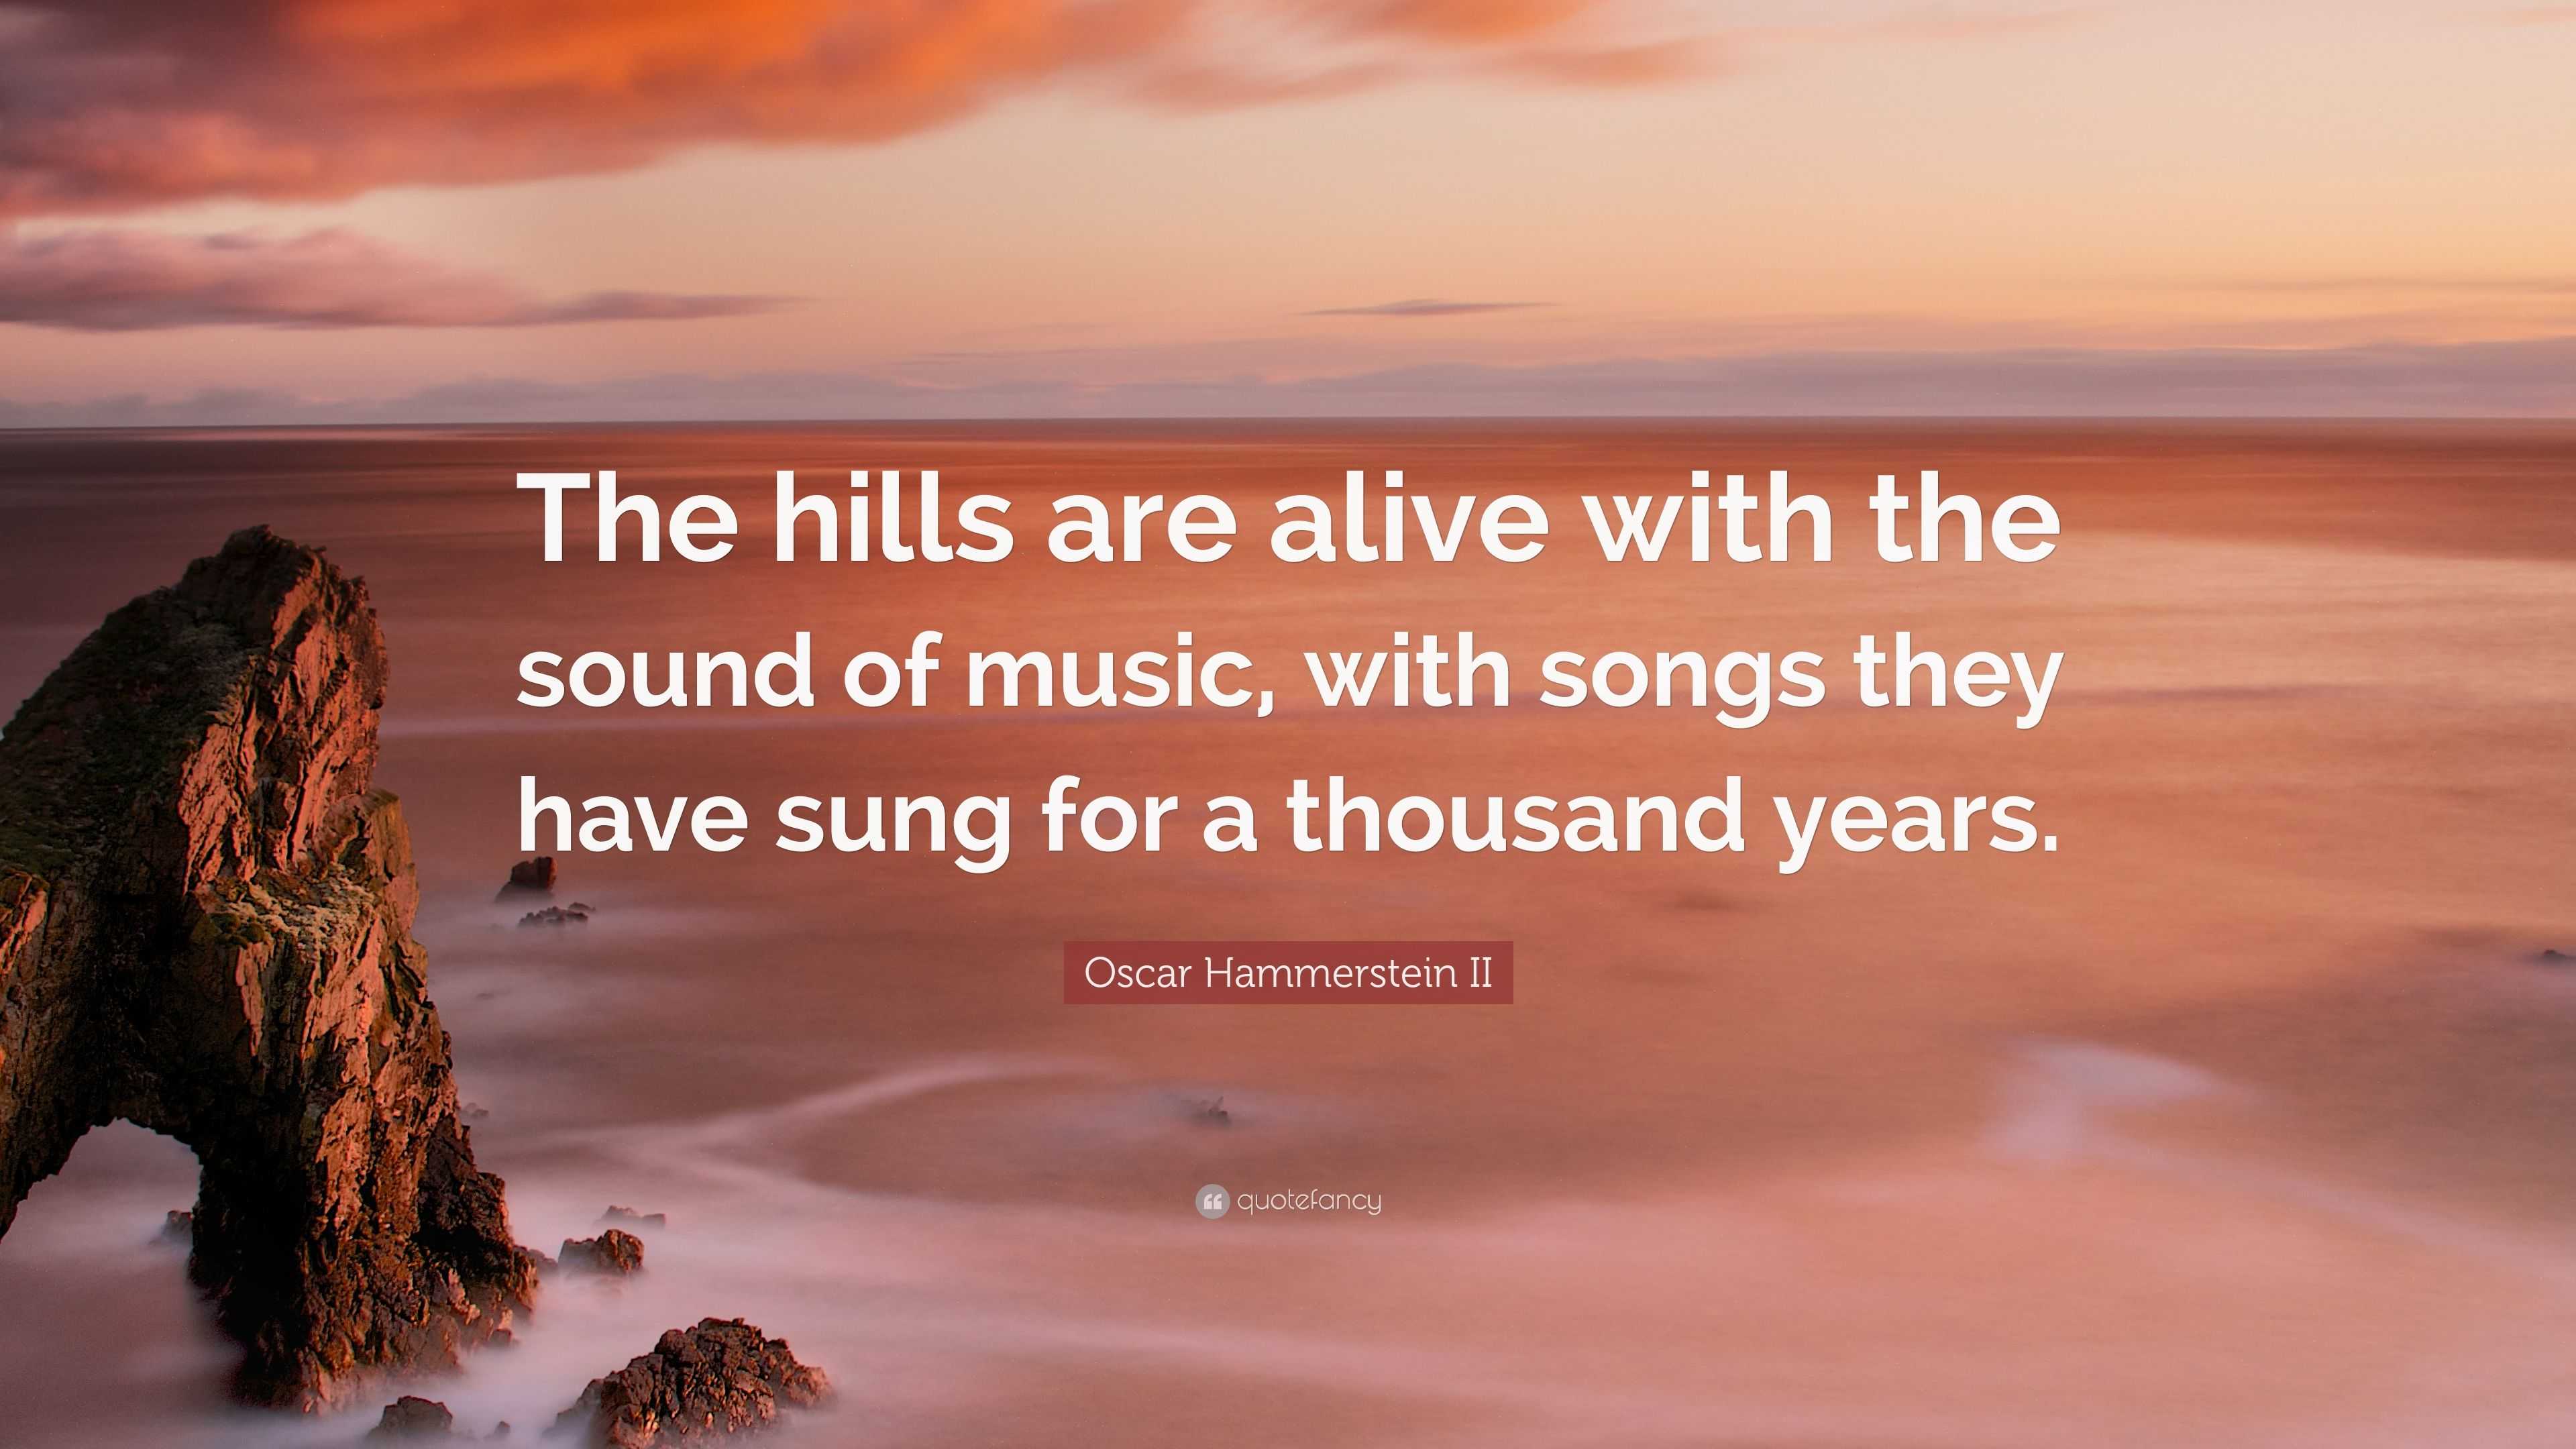 The hills are alive with growth mindset thinking - Sound of Music